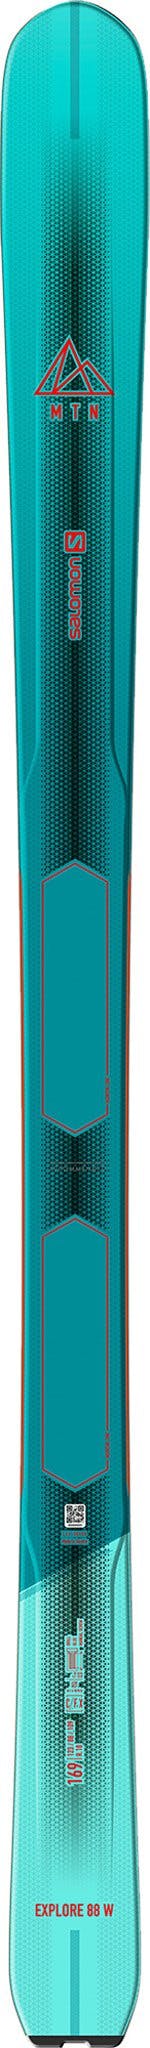 Product image for MTN Explore 88 Skis - Women's